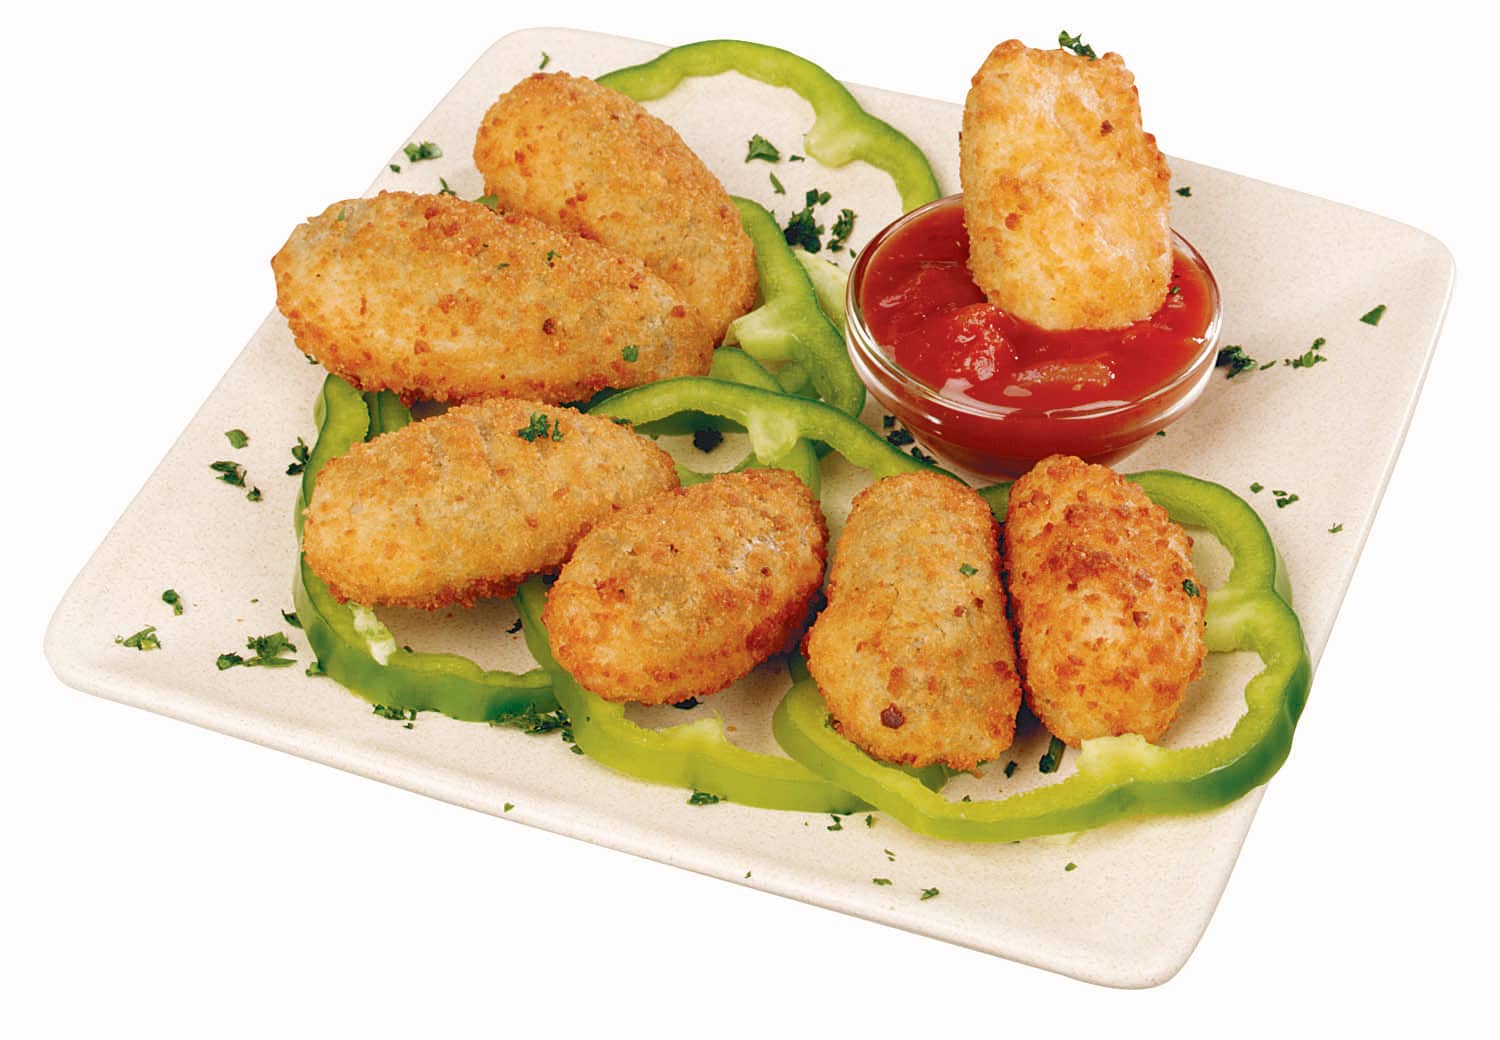 Jalapeno Popper Food Picture